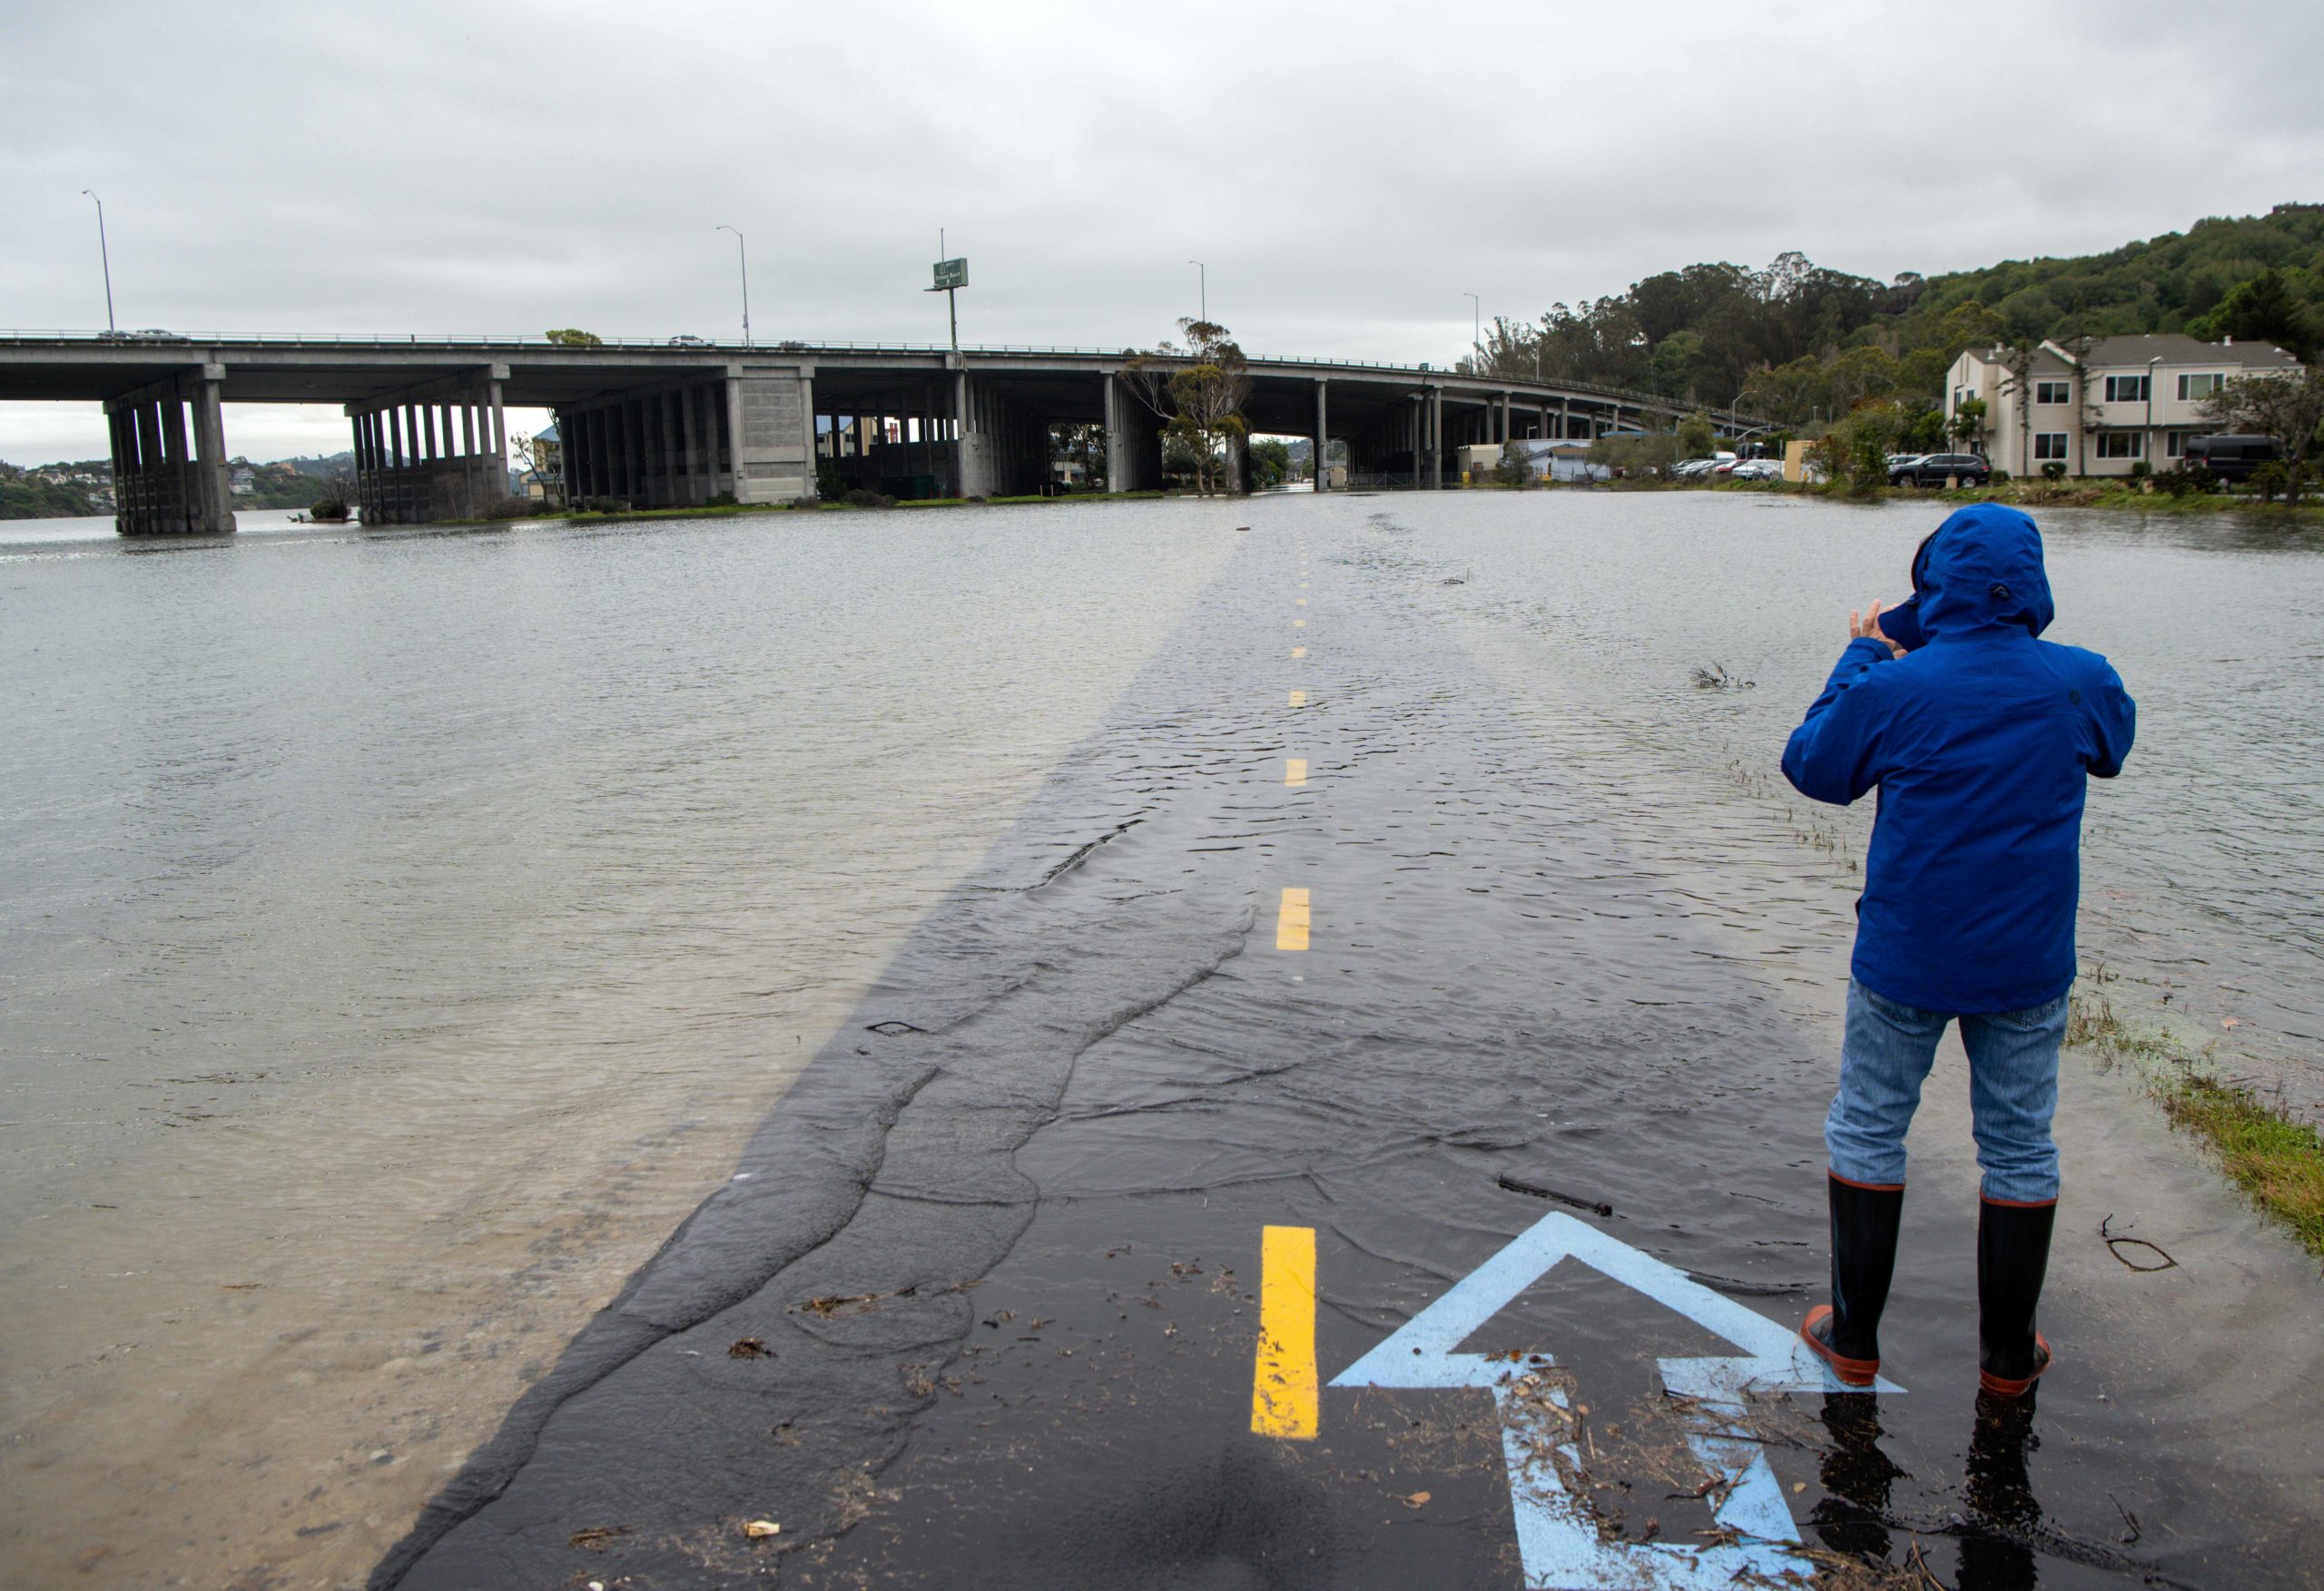 A man takes a photo of a flooded bike path in Mill Valley, California, on Jan. 3. (Josh Edelson/AFP via Getty Images)